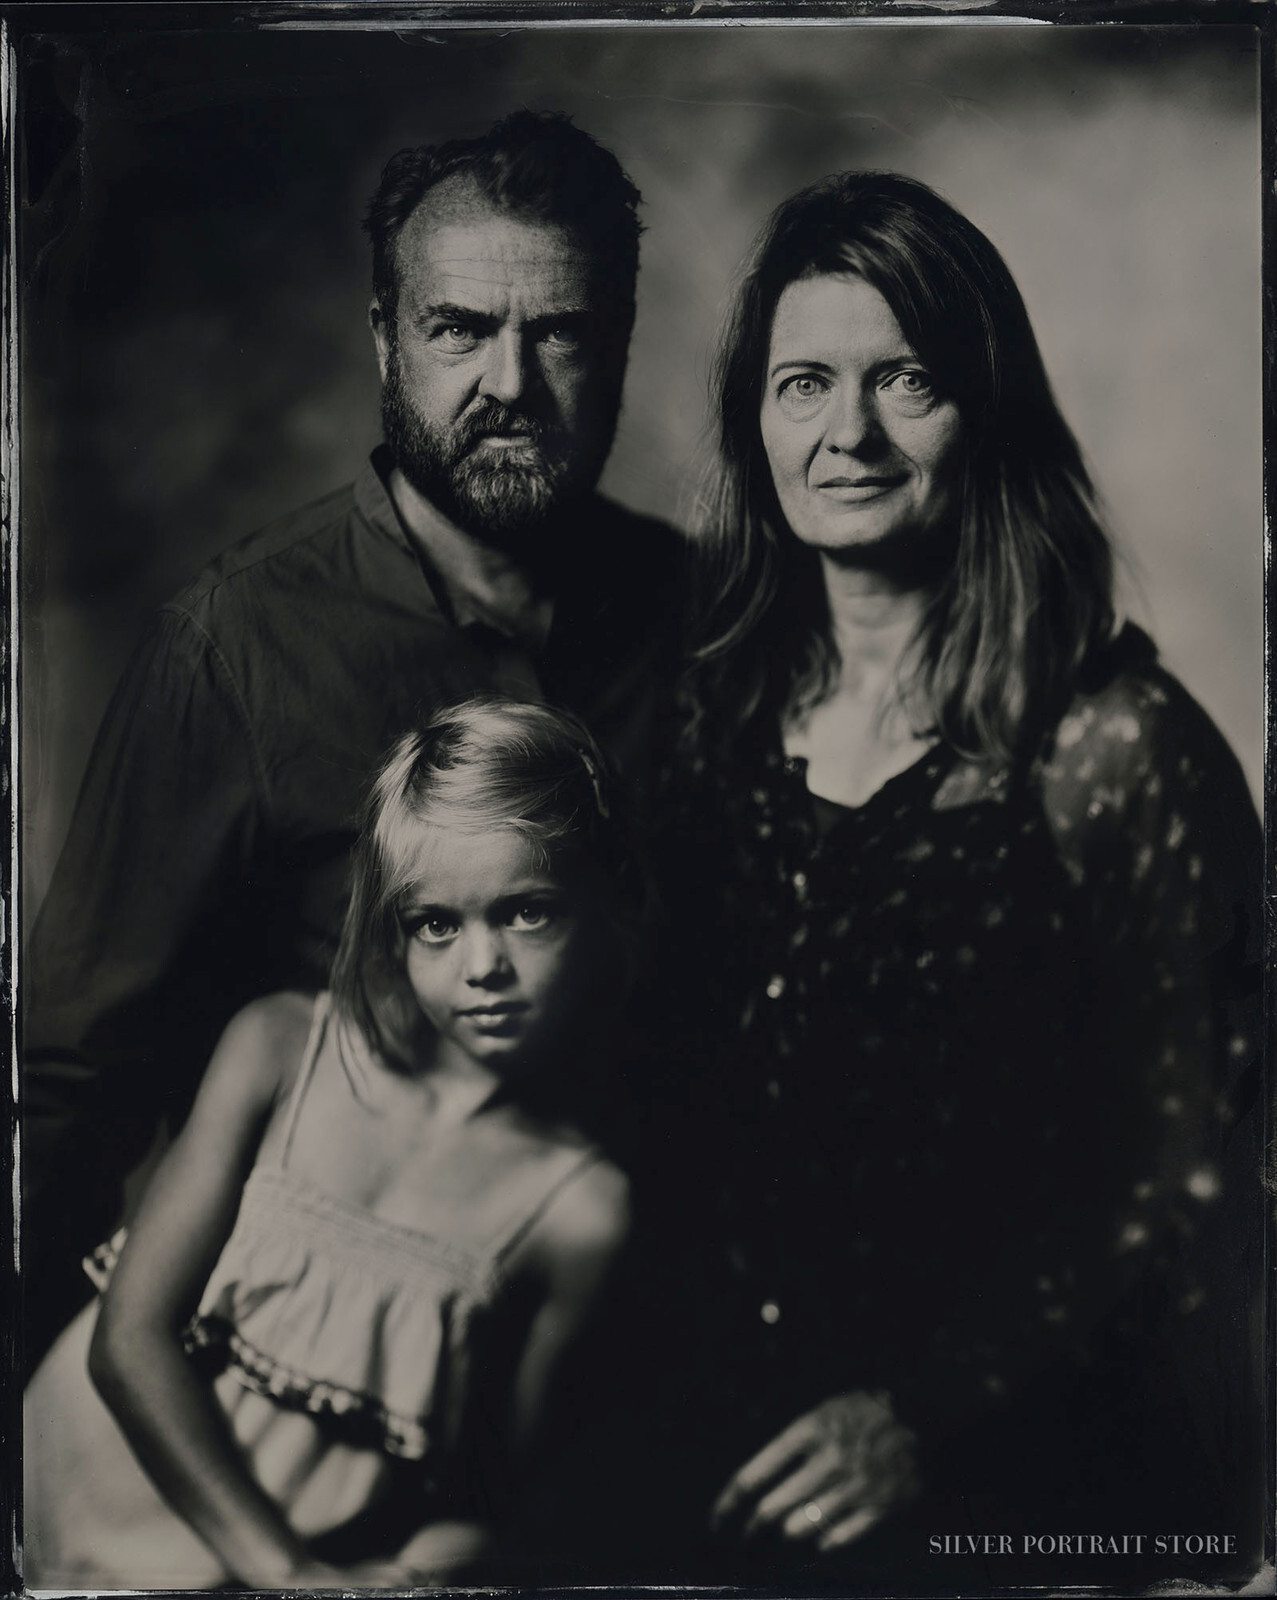 Alex, Julia & Kira-scan from Silver Portrait Store-Wet plate collodion-Tintype 20 x 25 cm.